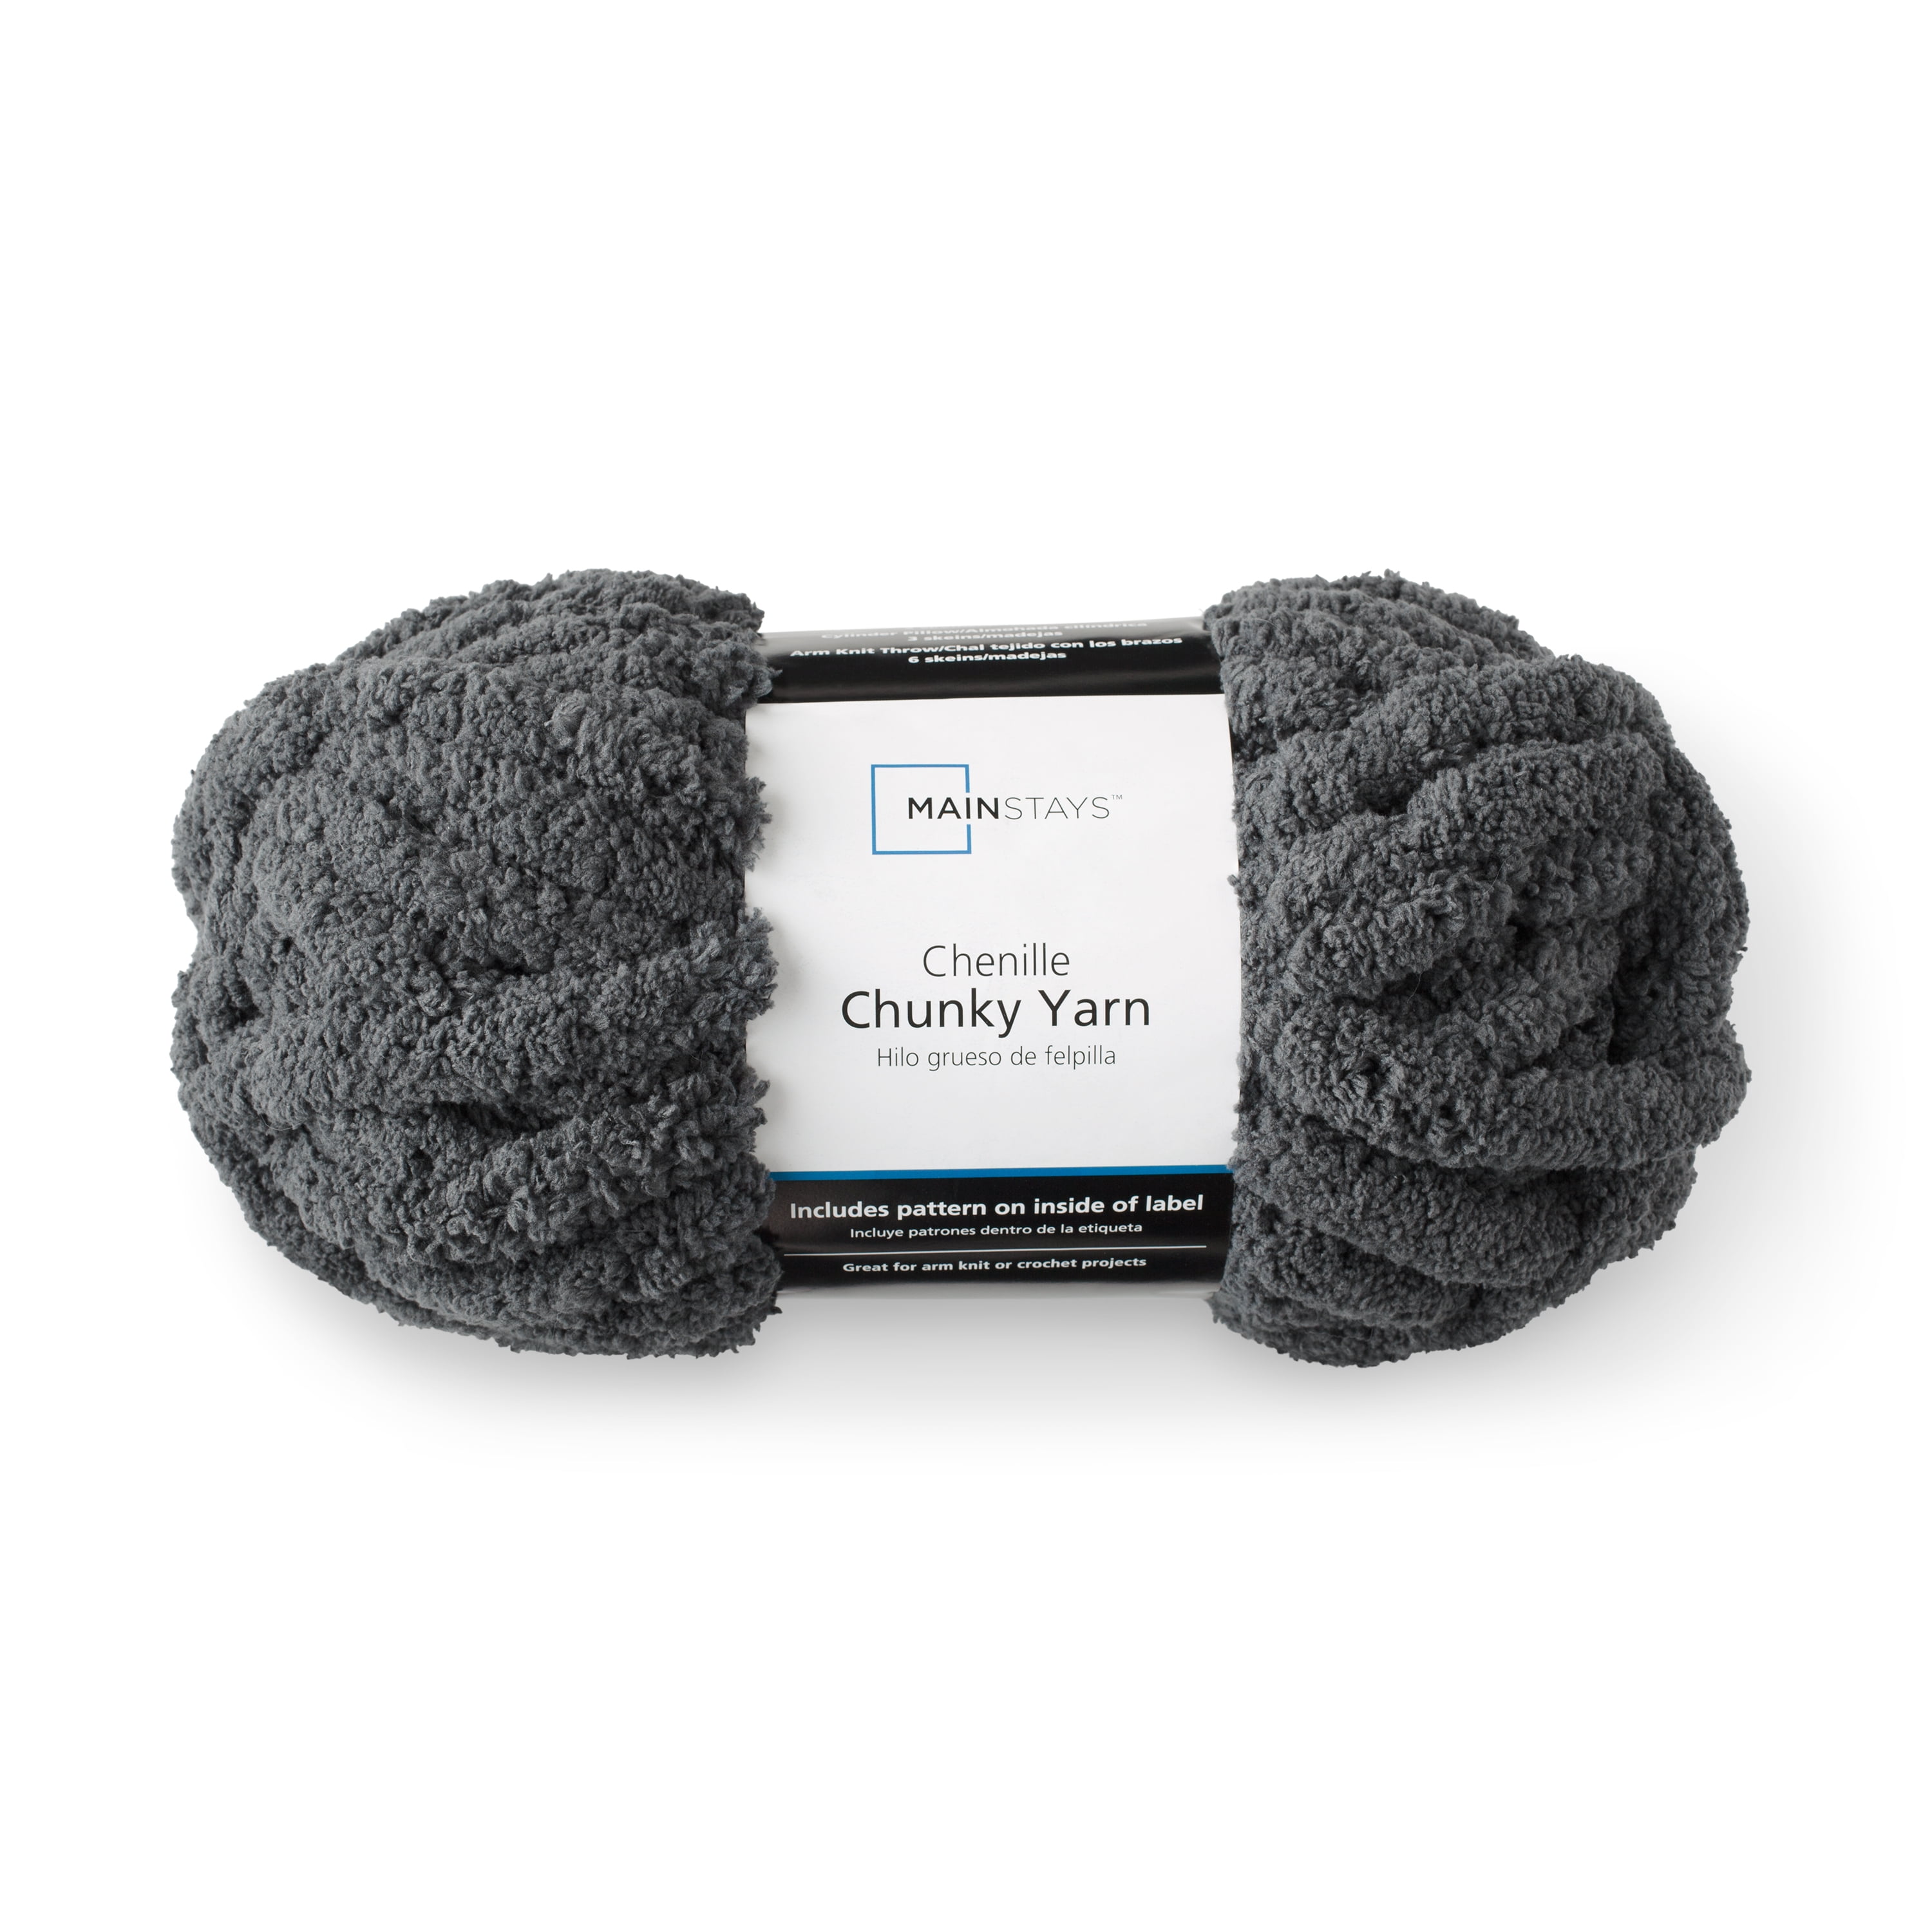 HOMBYS Charcoal Chunky Chenille Yarn for Crocheting, Bulky Thick Fluffy  Yarn for Knitting,Super Bulky Chunky Yarn for Hand Knitting Blanket, Soft